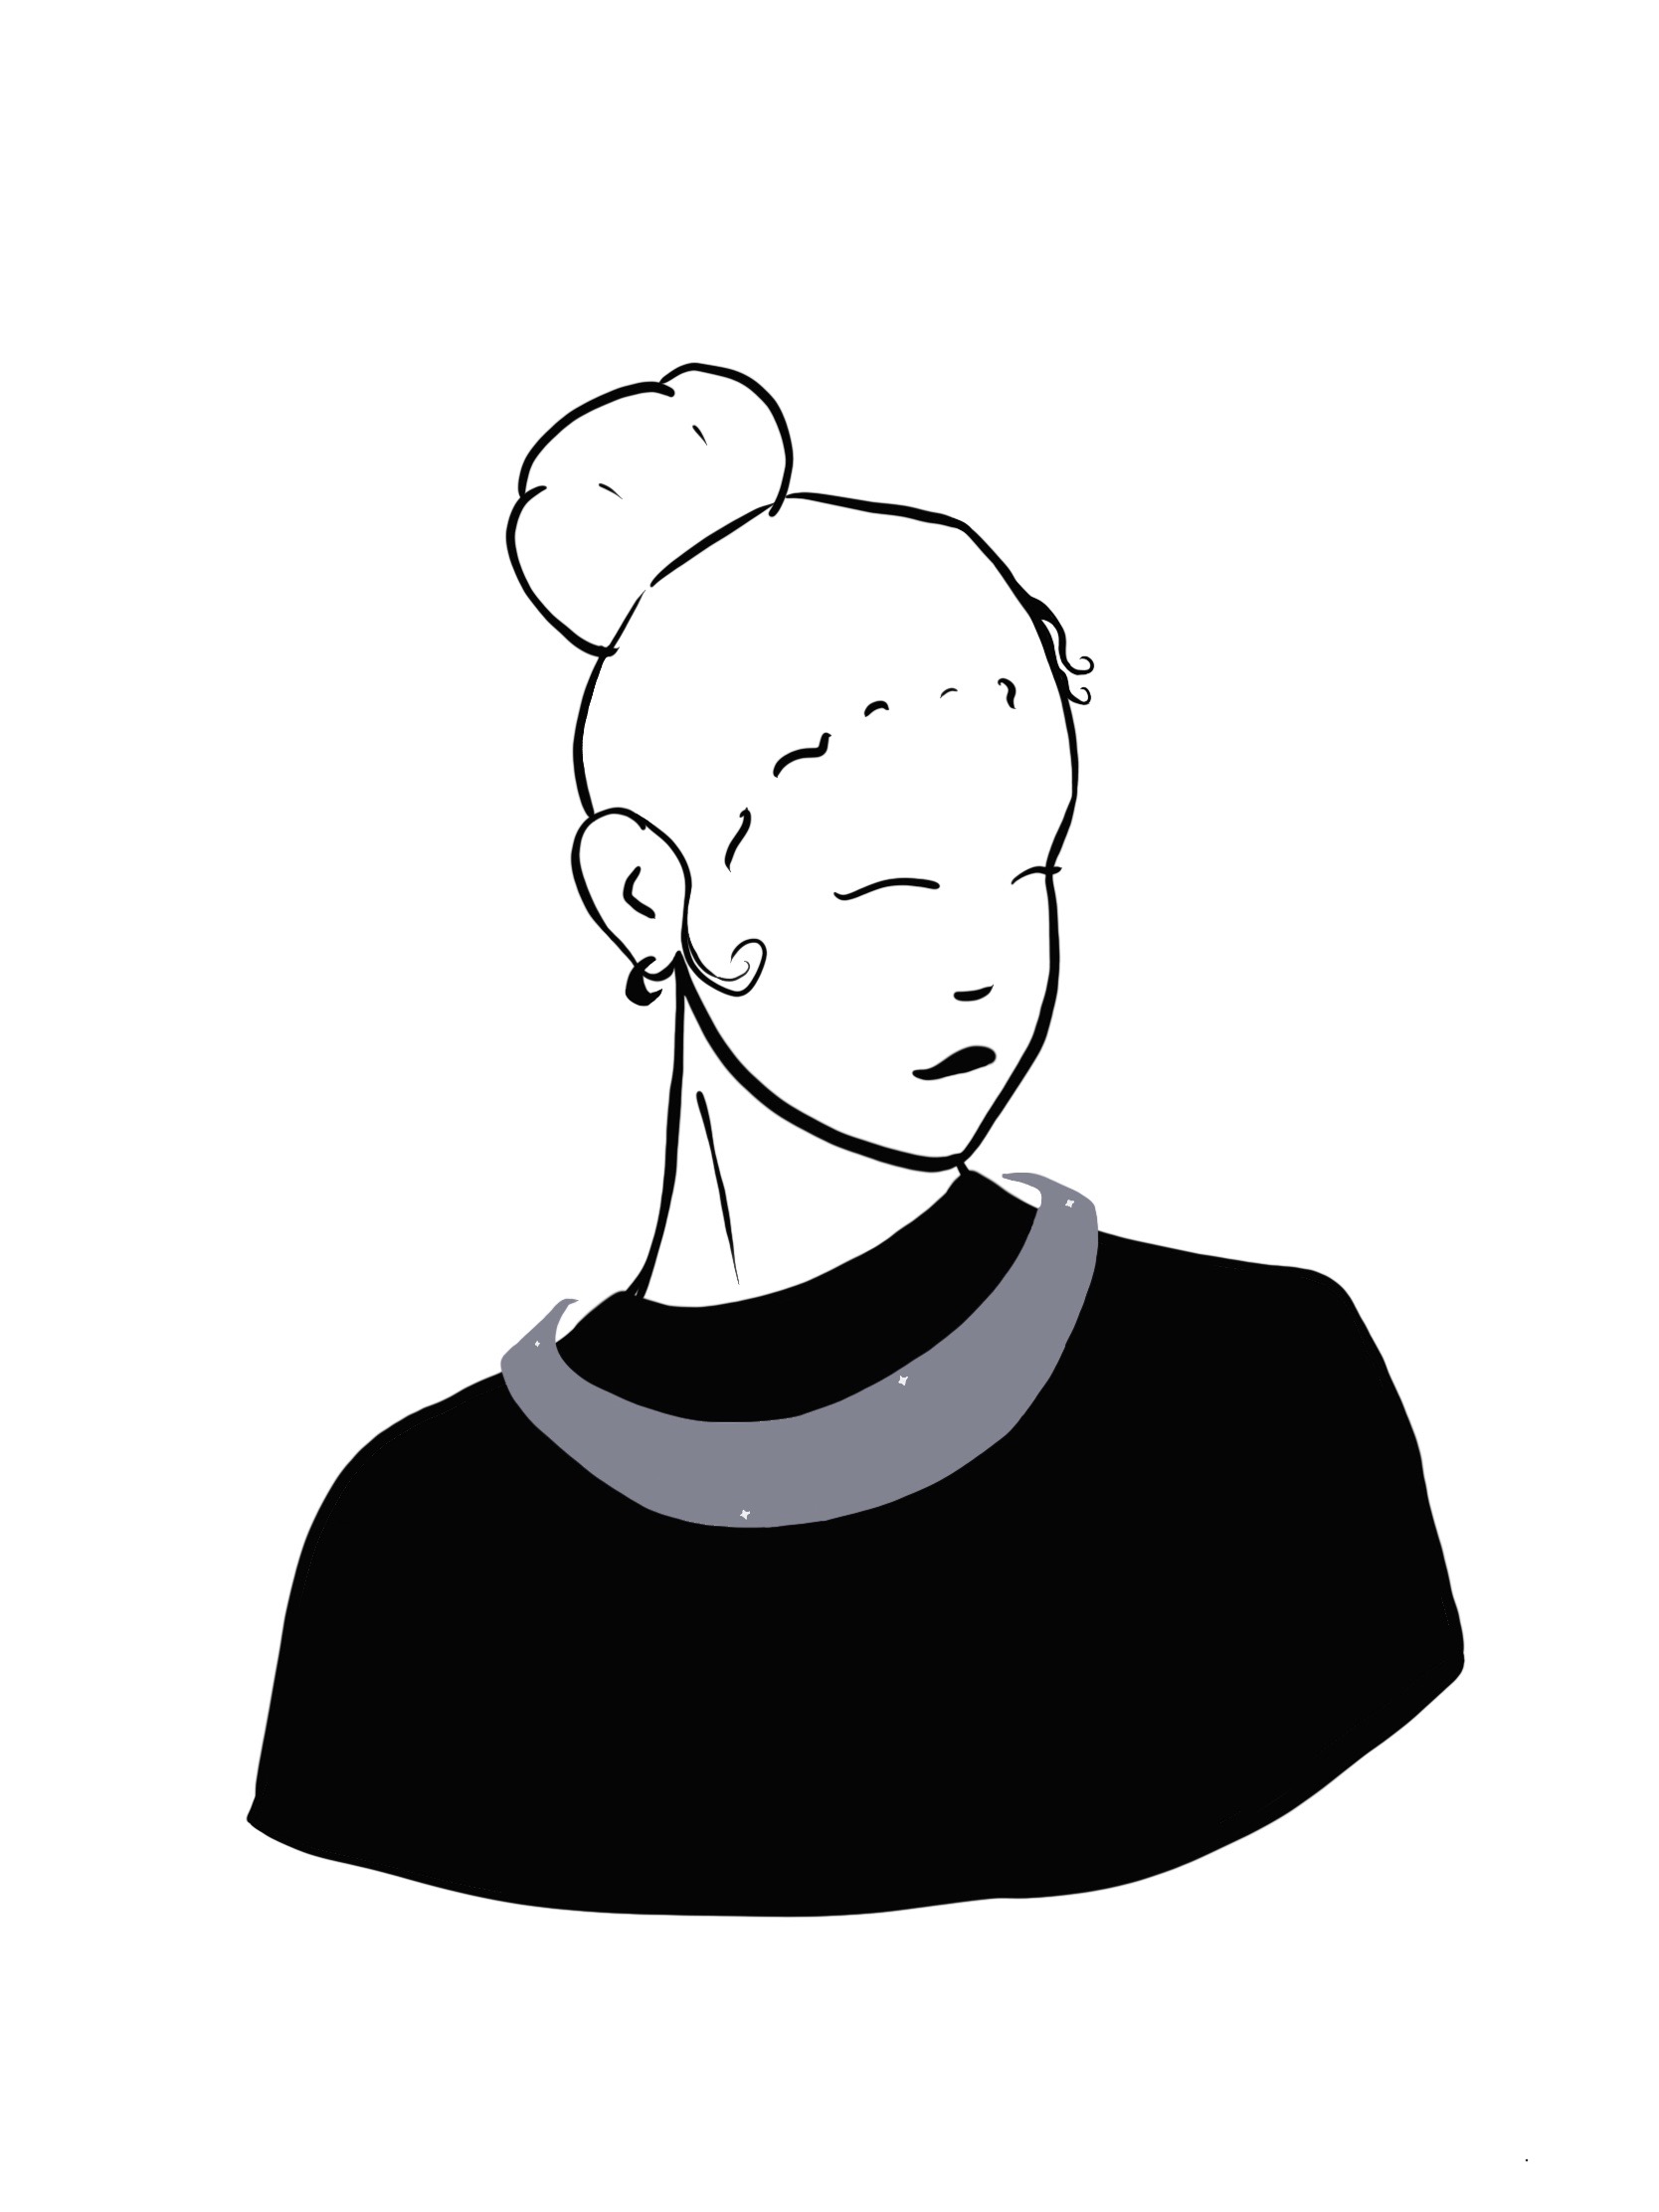 Line drawing illustration of a woman in a messy bun wearing a black crewneck and a sparkling silver collar necklace.